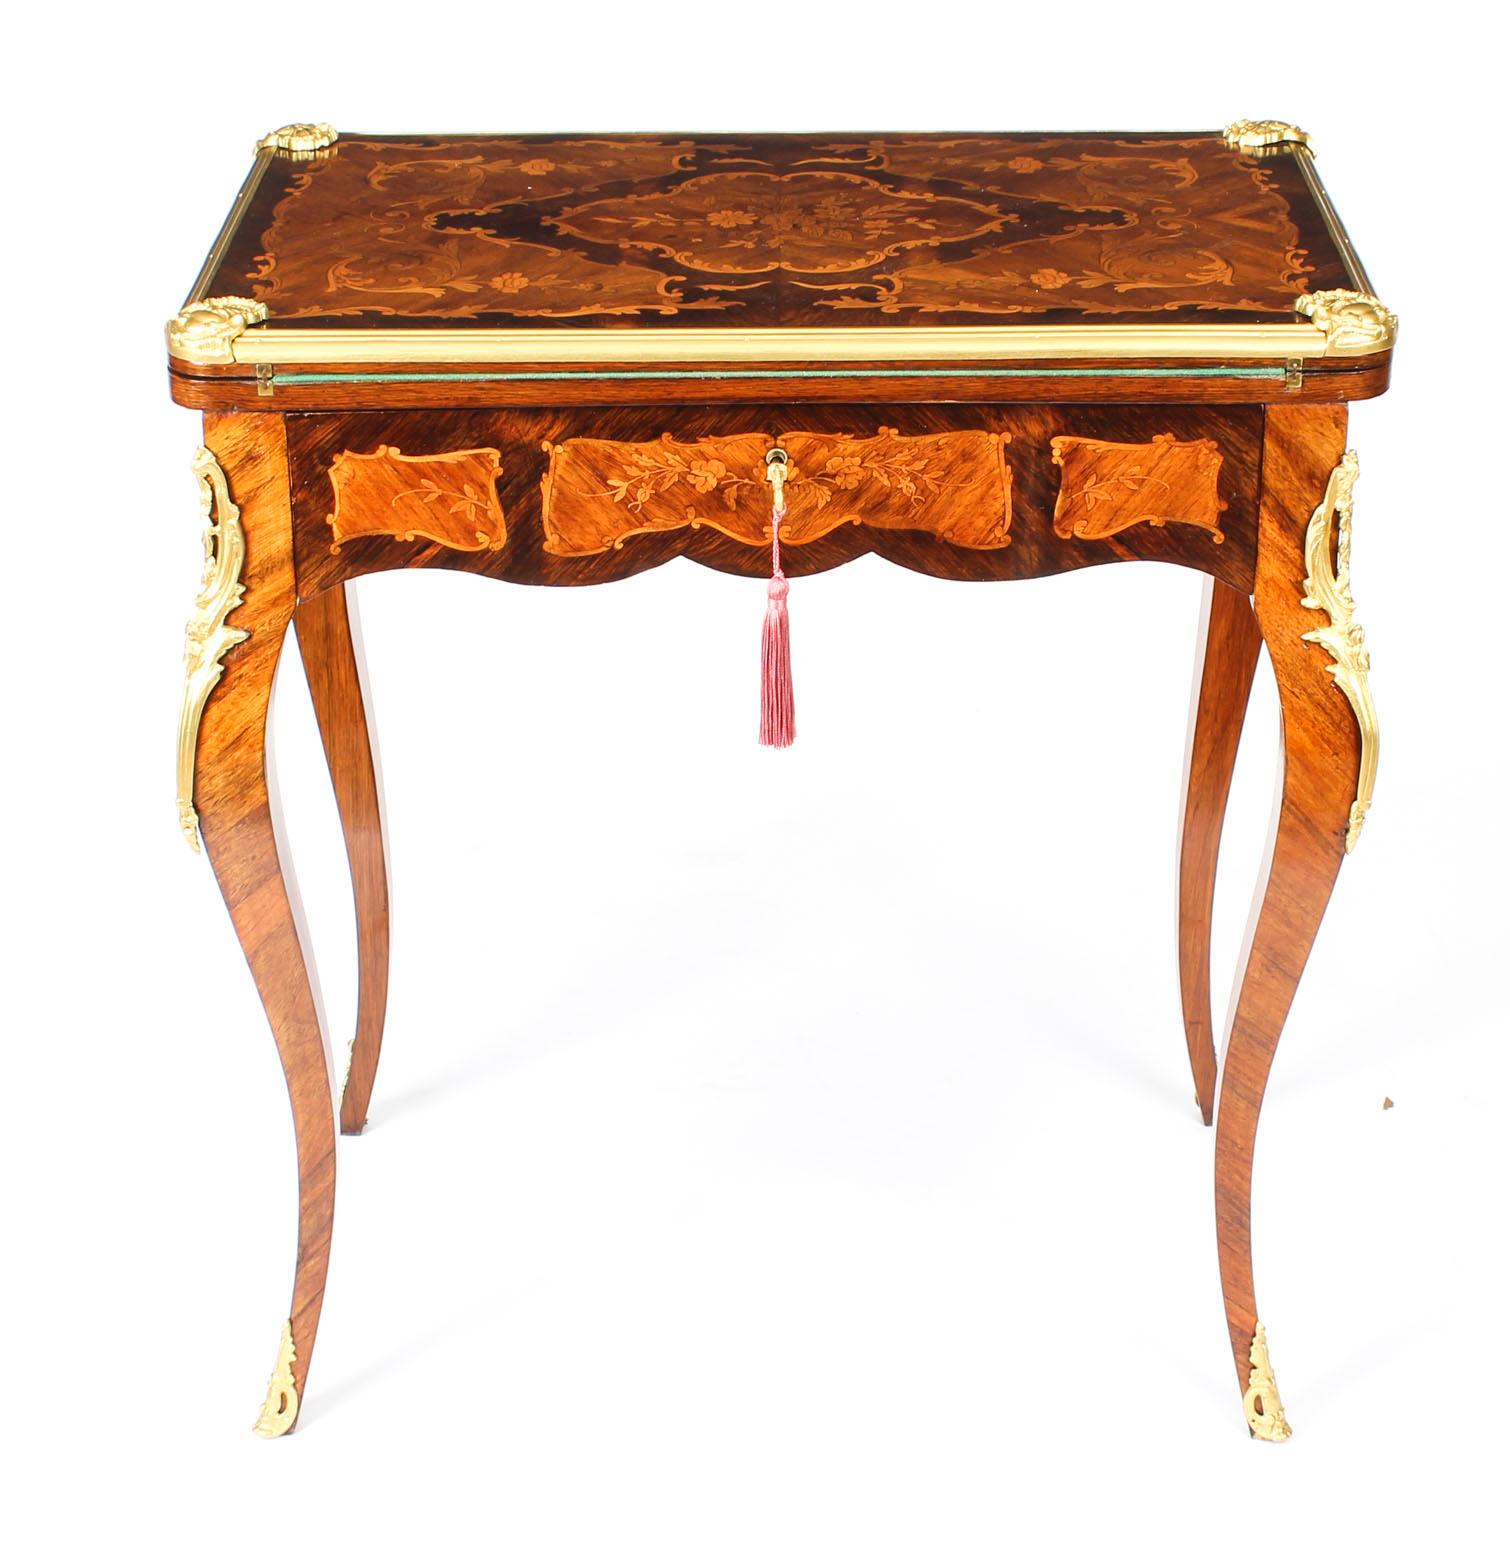 This is a rare late 19th century antique French ormolu mounted burr walnut and floral marquetry card table and writing table.

The shaped burr walnut top has lovely kingwood banding encompassing exquisite floral marquetry decoration and a stunning